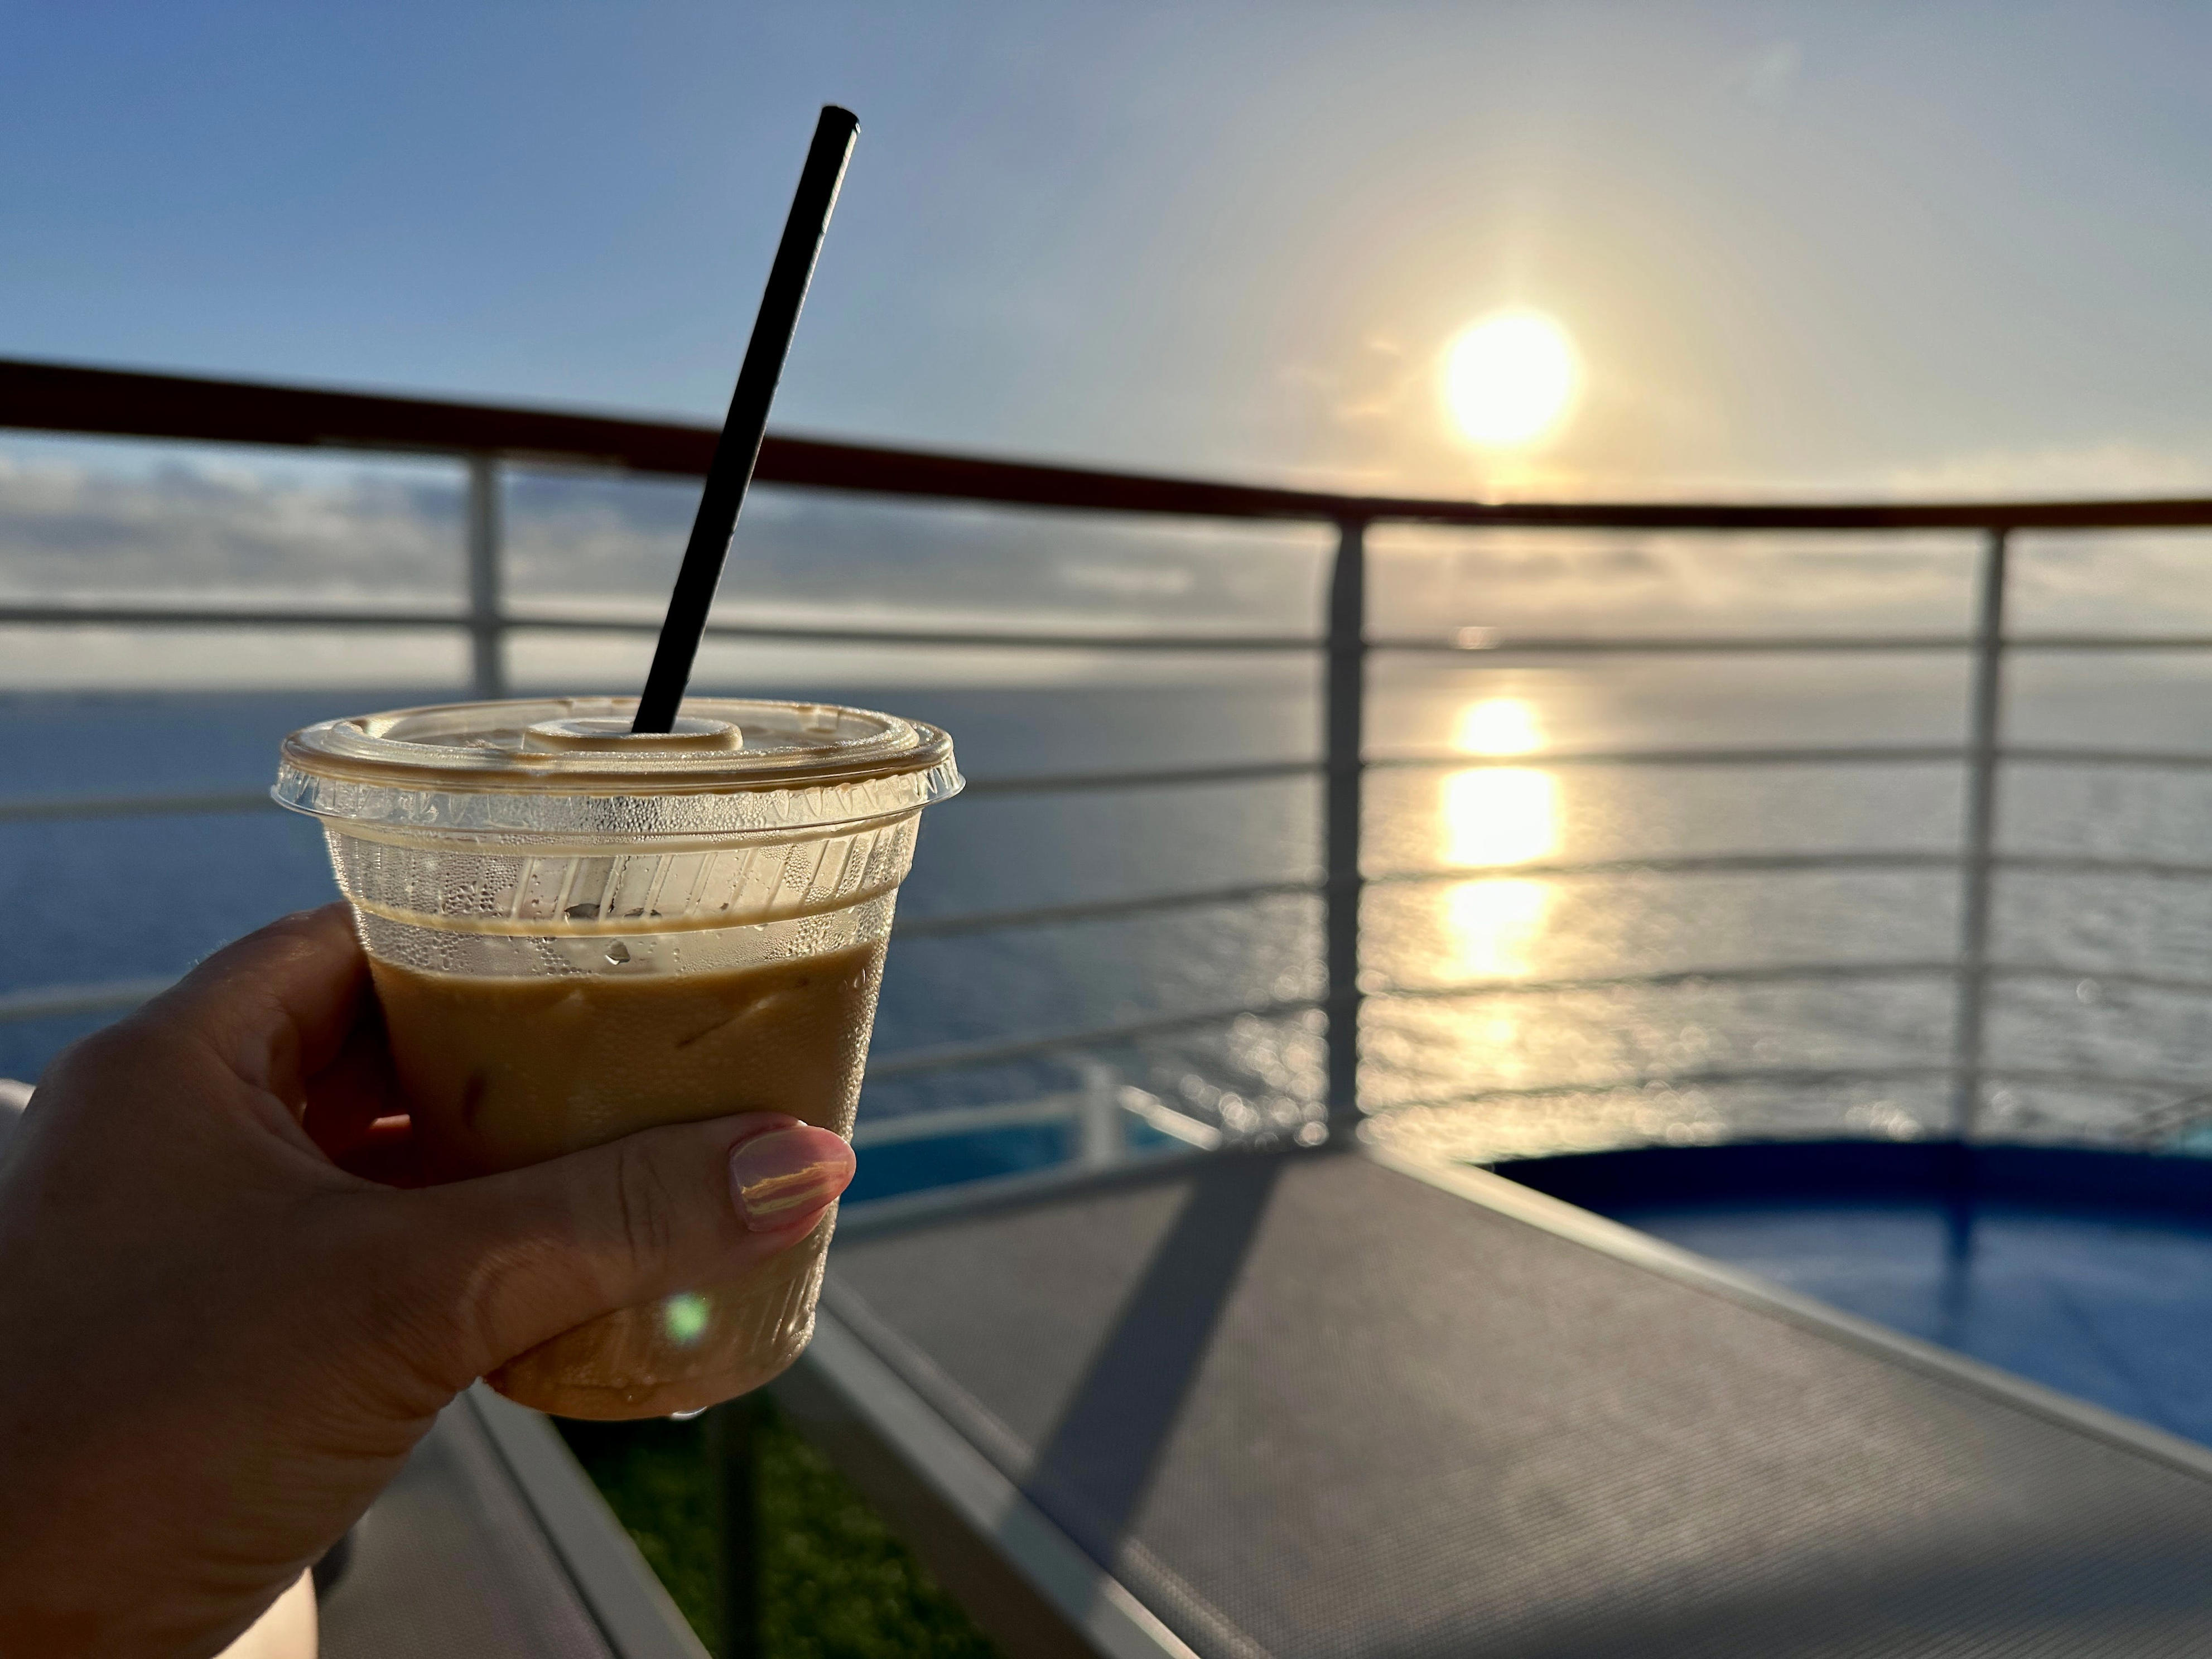 <p>Morning routines truly are an introvert's key to powering up for long days of cruising, whether those days include time in the pool or adventures in various ports of call. </p><p>After my morning walks, I'd grab a coffee and head to one of the ship's upper decks, where I'd read for a bit, getting caffeinated and ready for whatever each day would bring.</p>